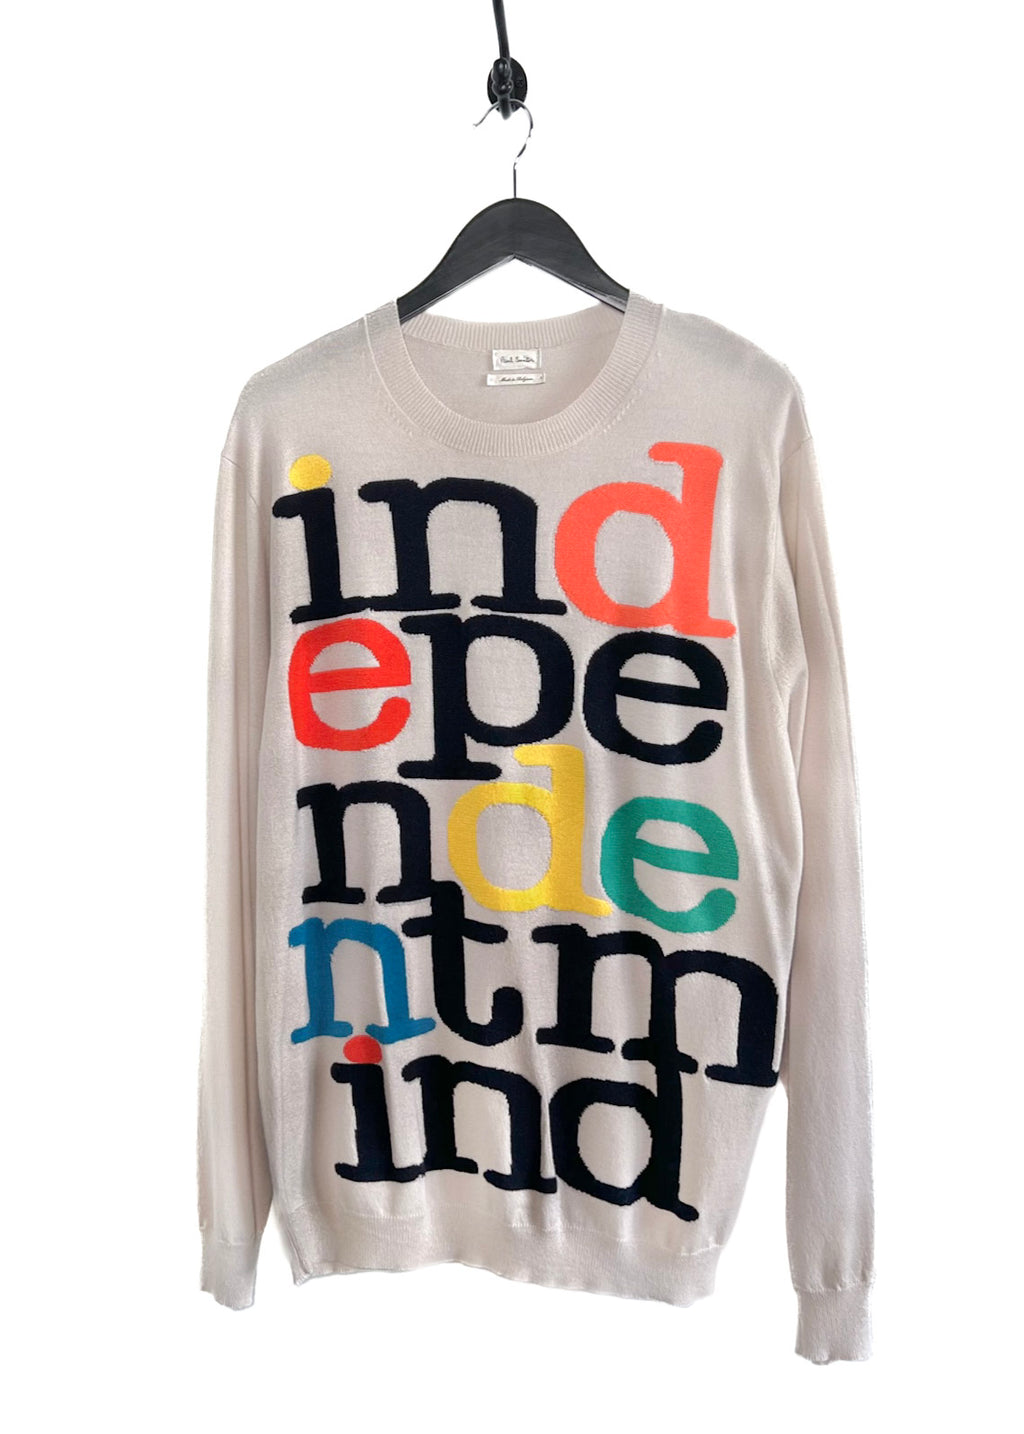 Paul Smith "Independent Mind" Intersia Beige Knit Sweater